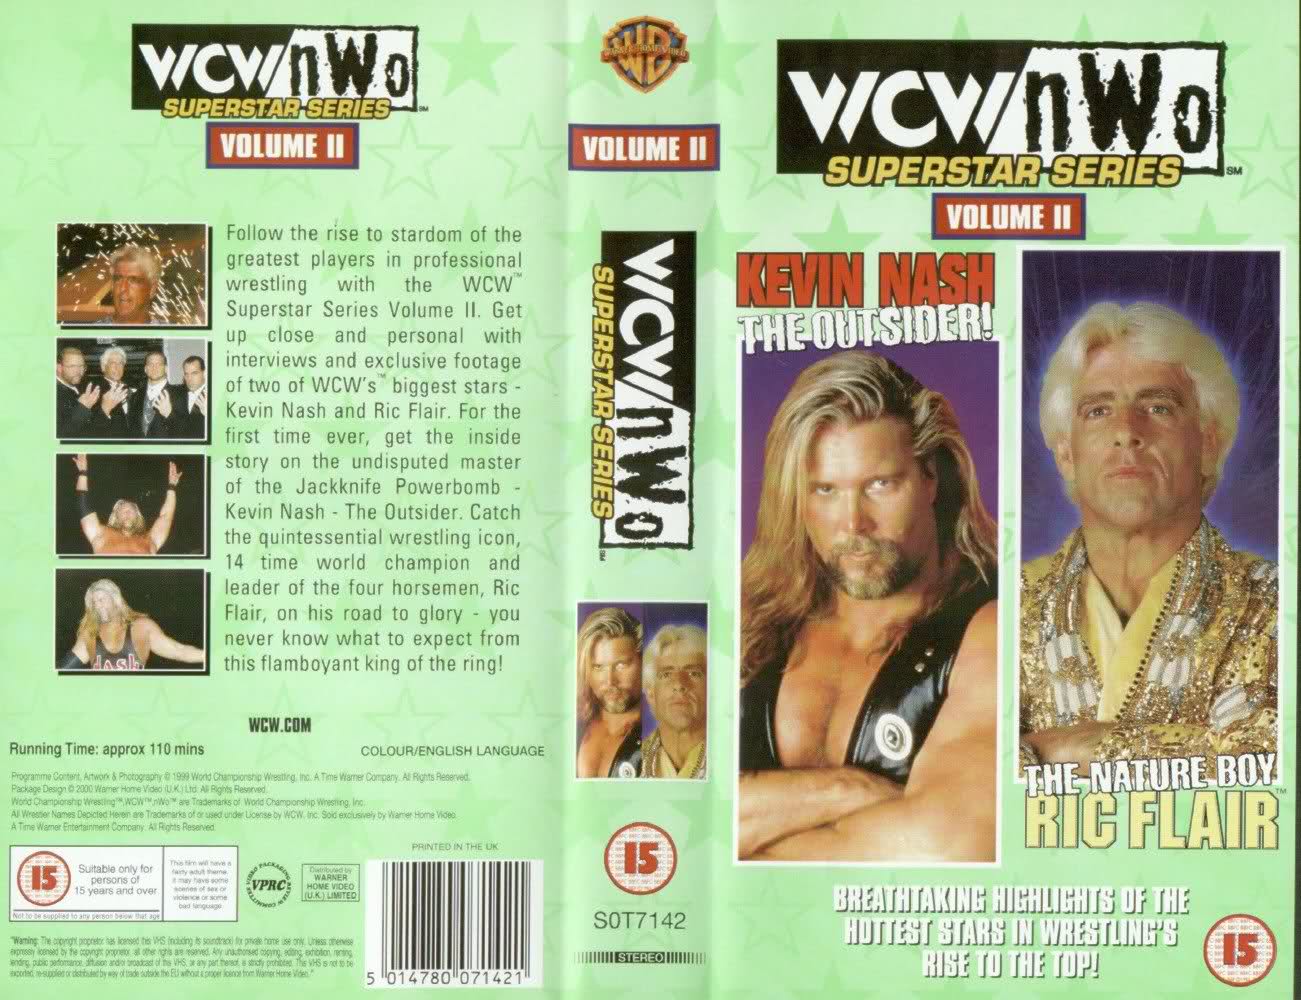 wcw-nwo superstars series volume ii kevin nash the outsider   the nature boy ric flair